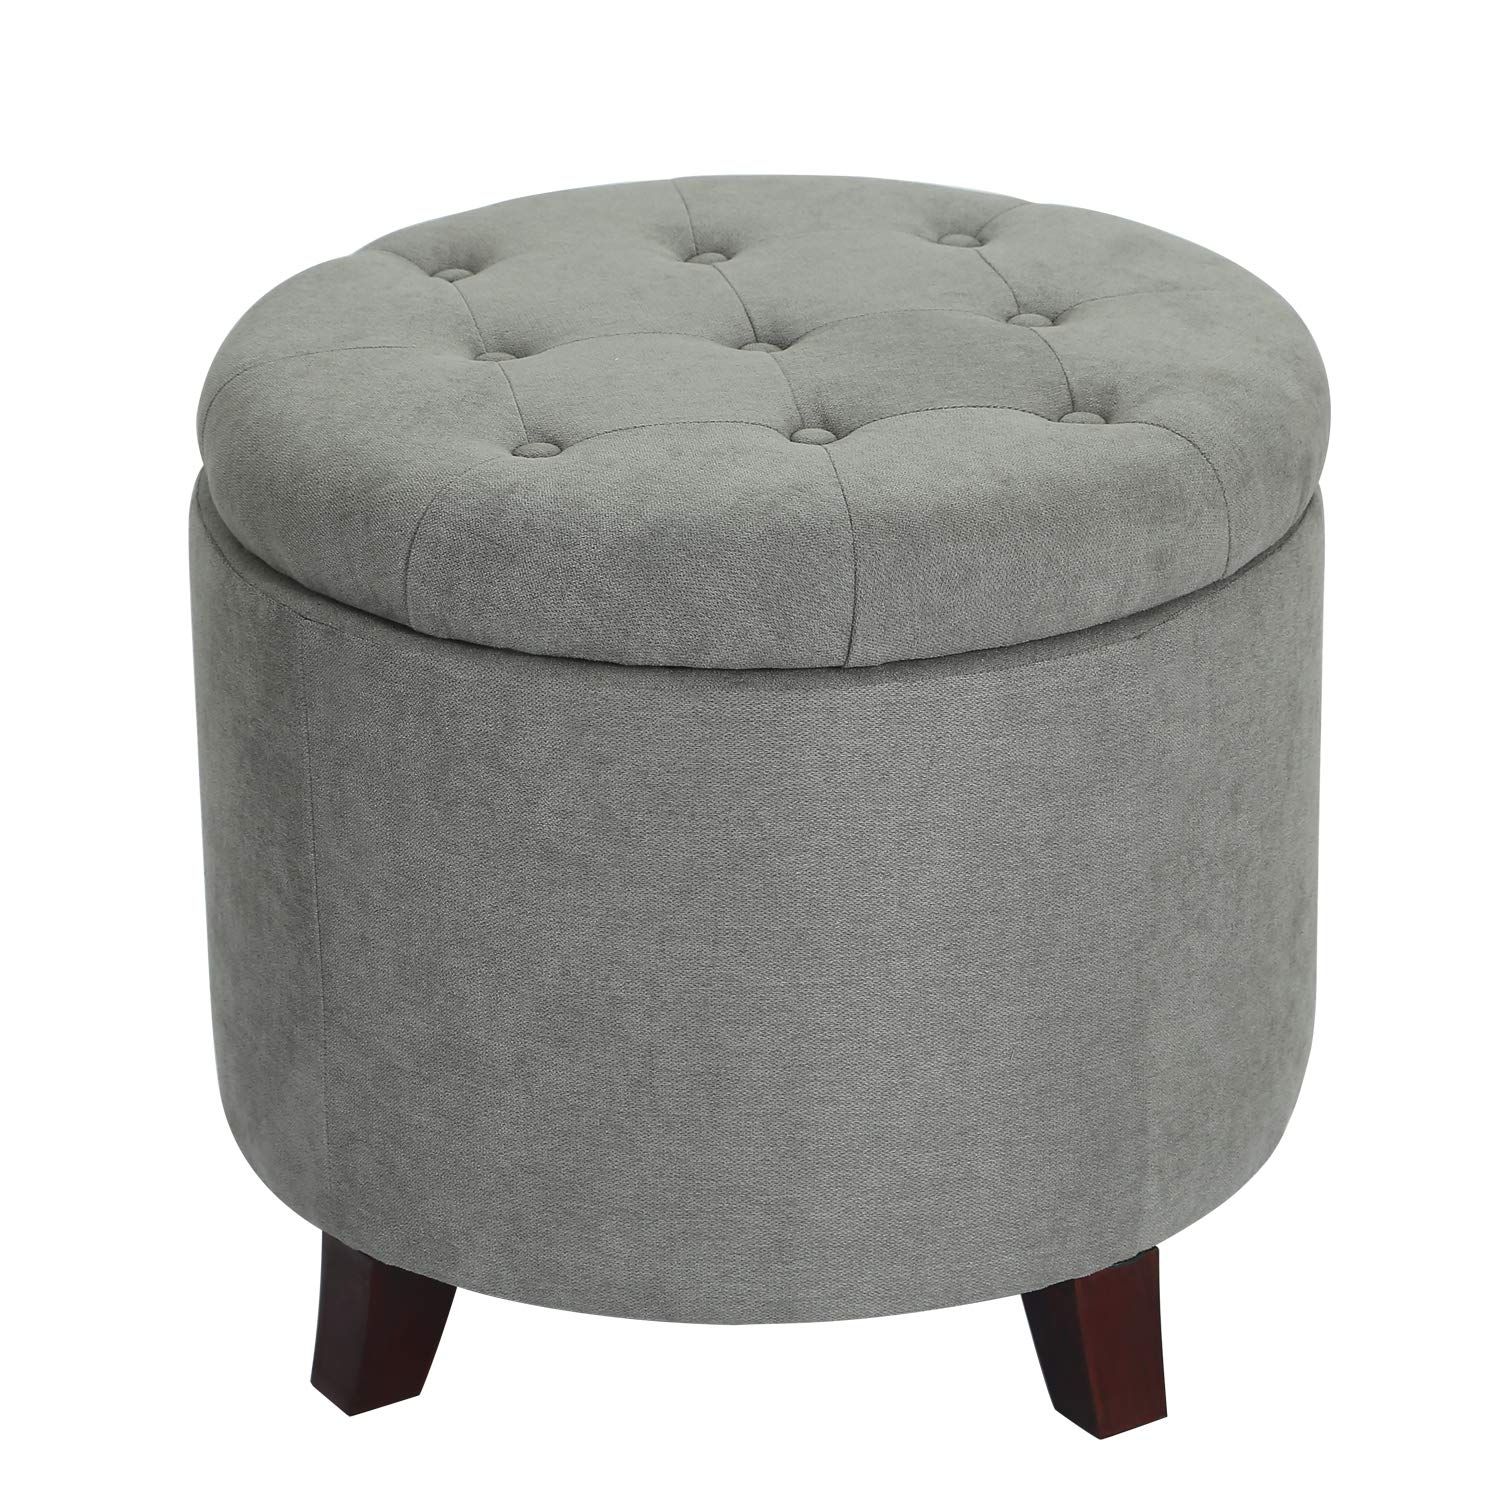 Adeco Fabric Cushion Round Button Tufted Lift Top Storage Ottoman Intended For Gray Velvet Ribbed Fabric Round Storage Ottomans (View 1 of 20)